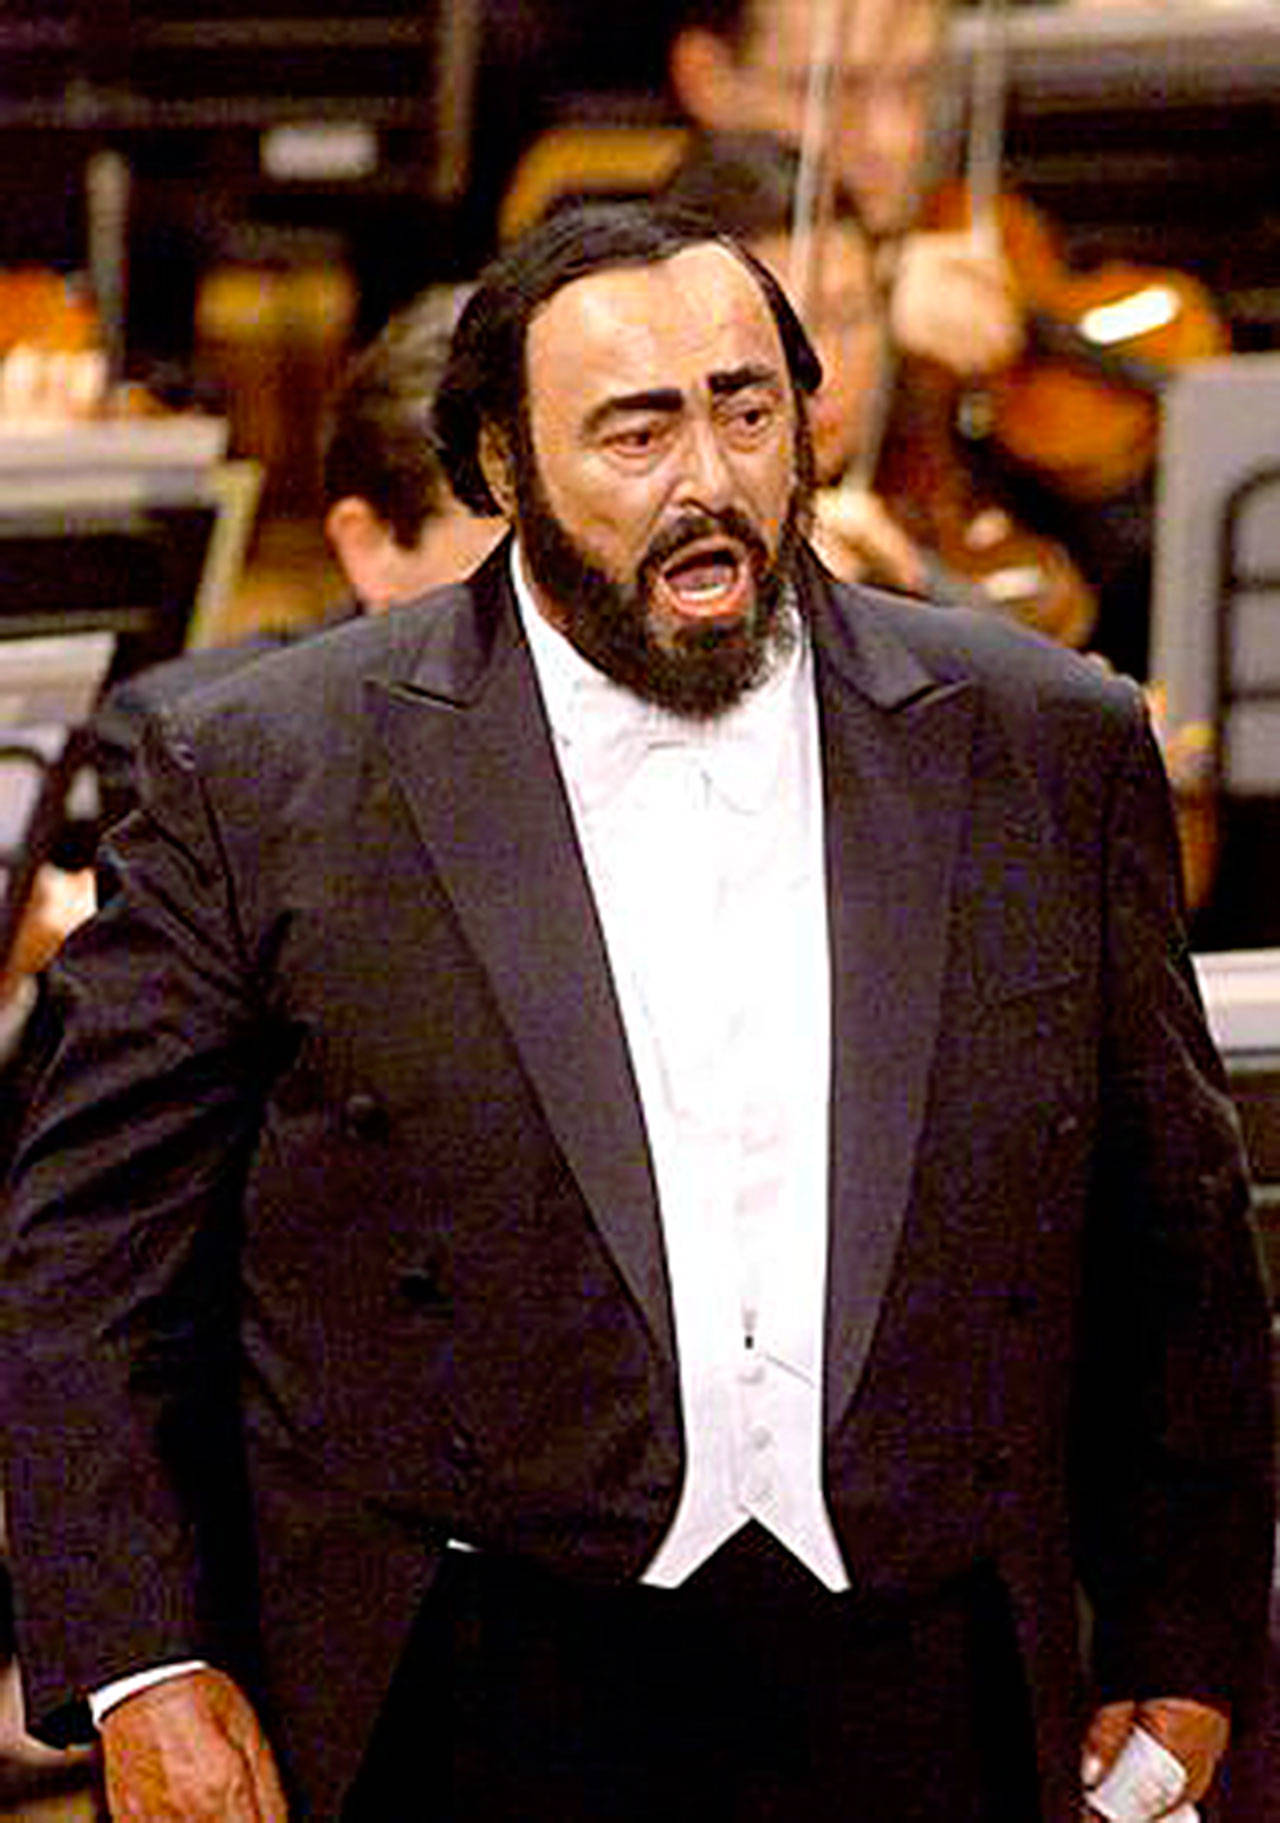 Luciano Pavarotti sings during a concert marking the 40th anniversary of his debut in his native town of Modena, central Italy, on April 29, 2001. Pavarotti made his debut as Rodolfo in Puccini’s “La Boheme” at Reggio Emilia, Italy, in 1961. (AP Photo/Paolo Ferrari, files)